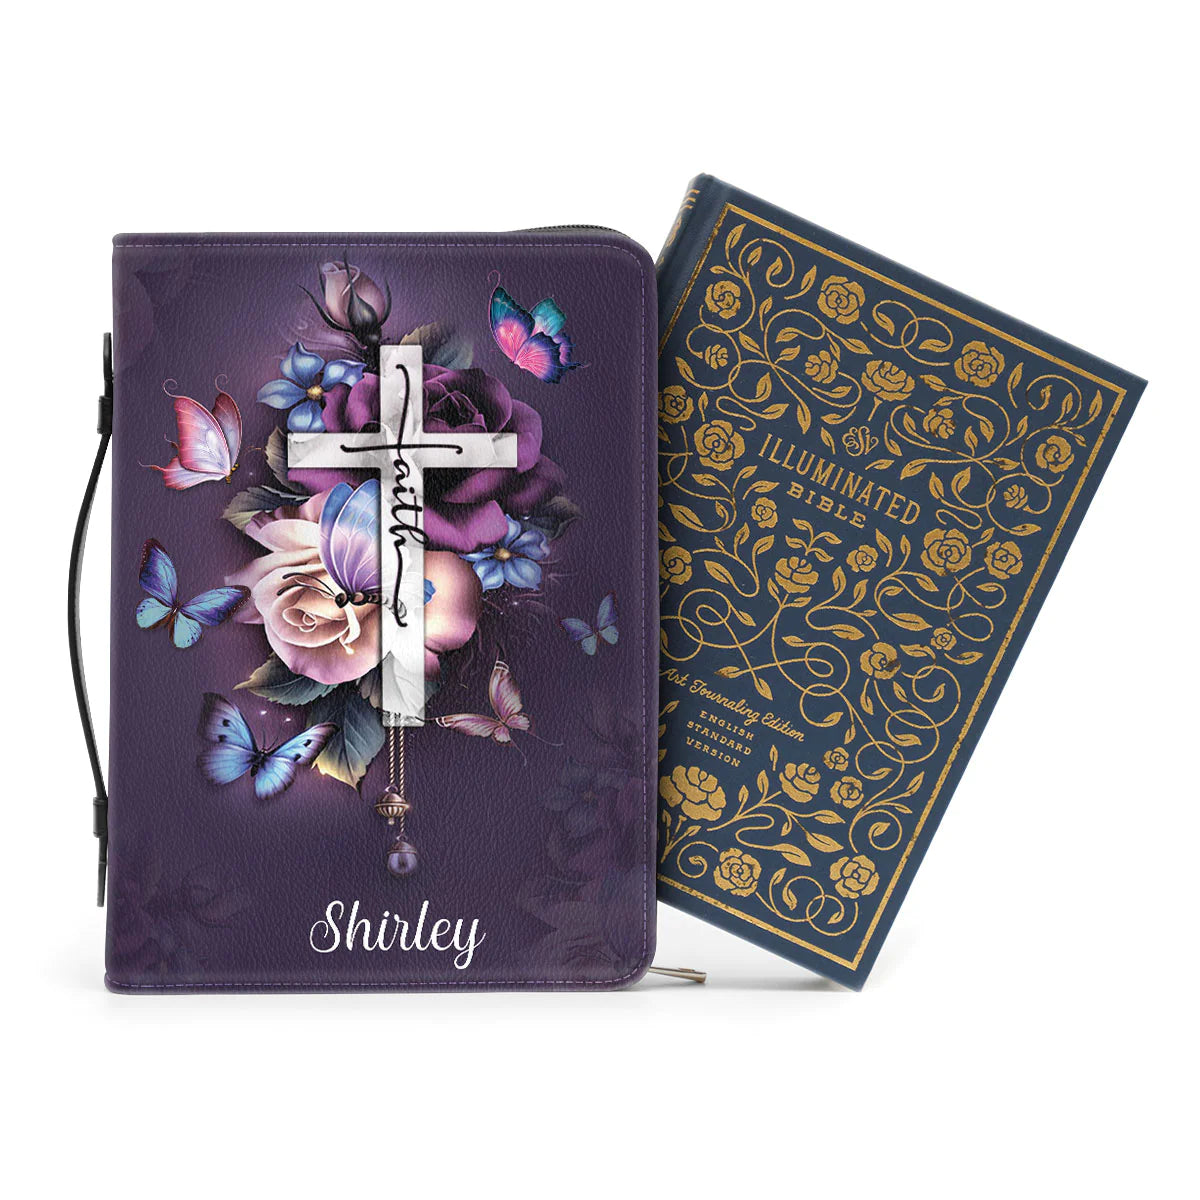 Gifts for Girly Girls - The Shirley Journey